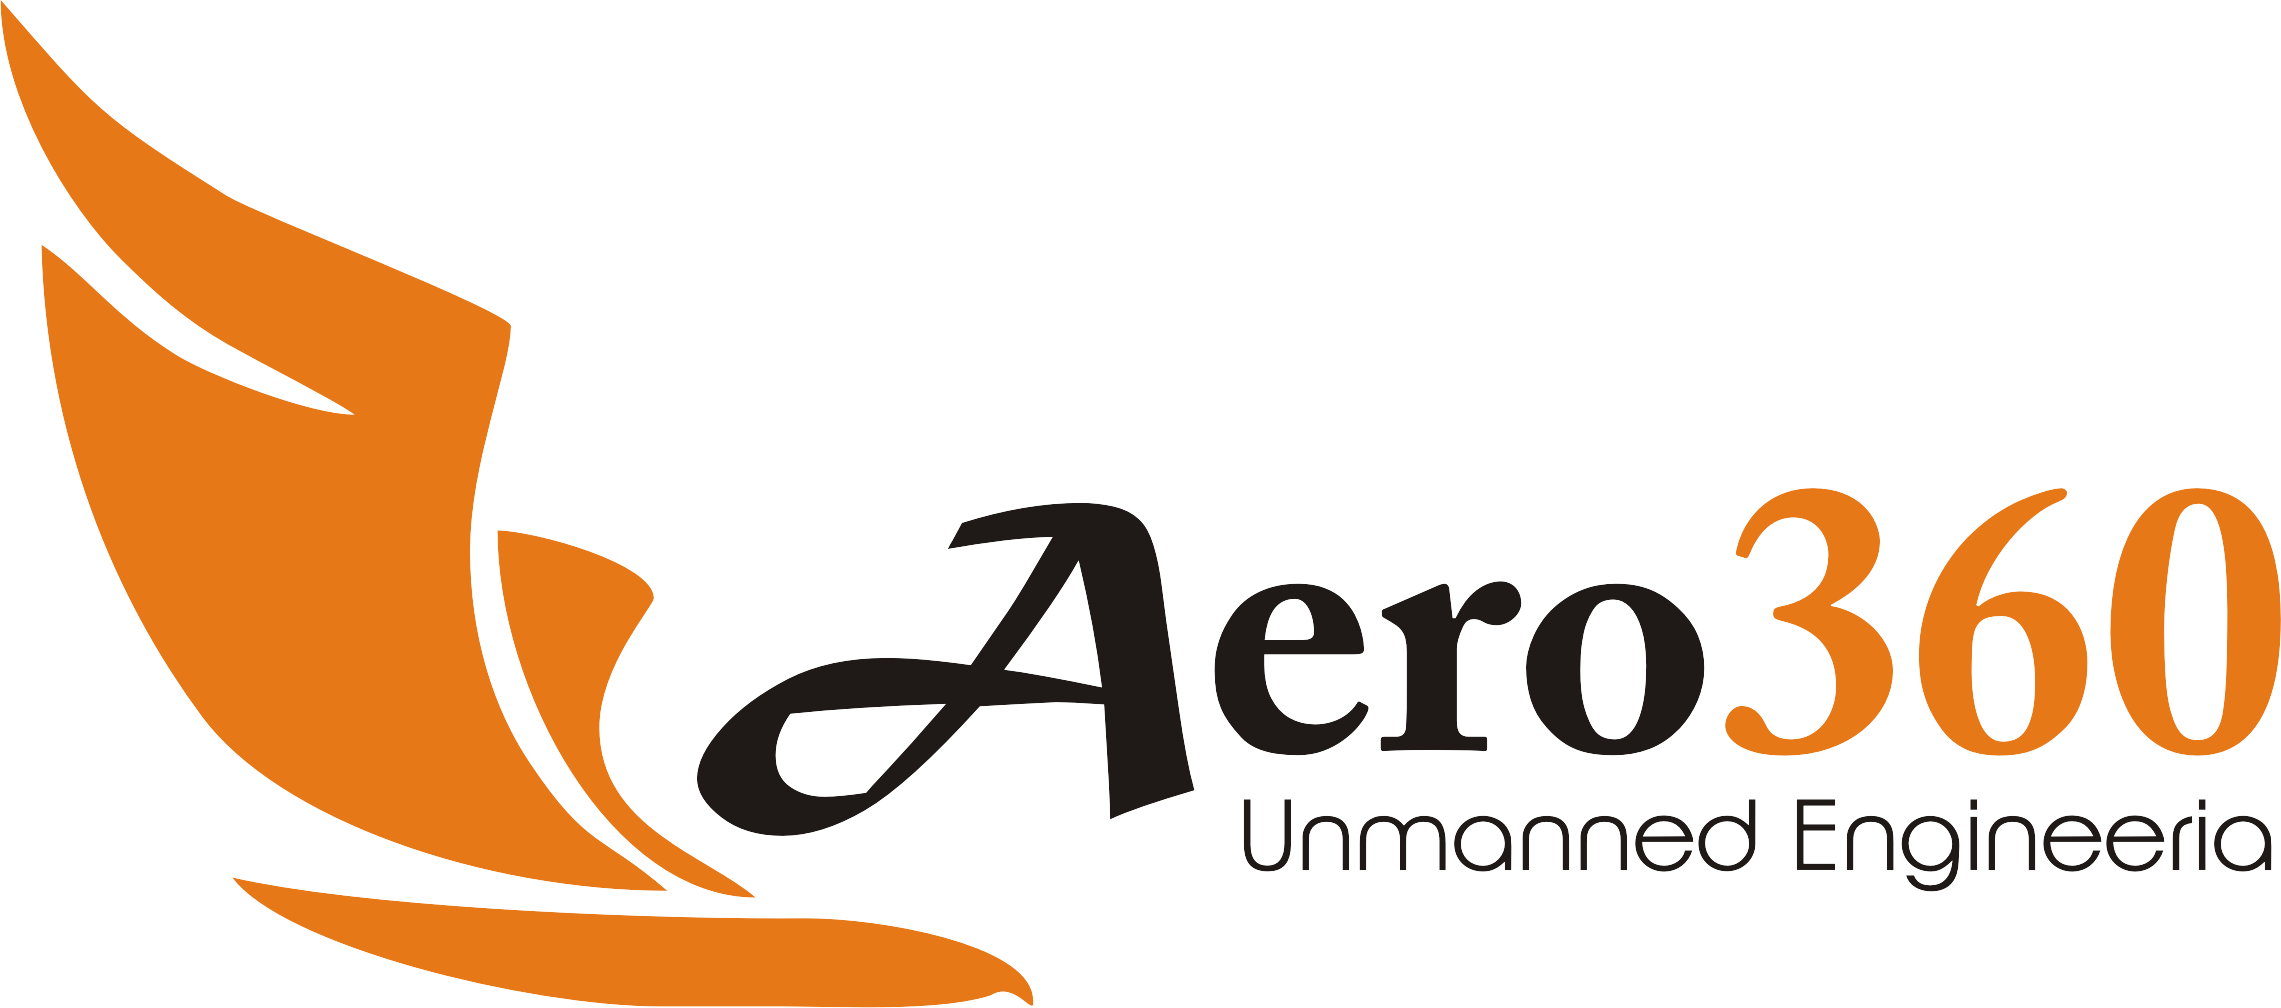 About Aero360 - DroniX Technologies Pvt Ltd - Energy company in India | F6S